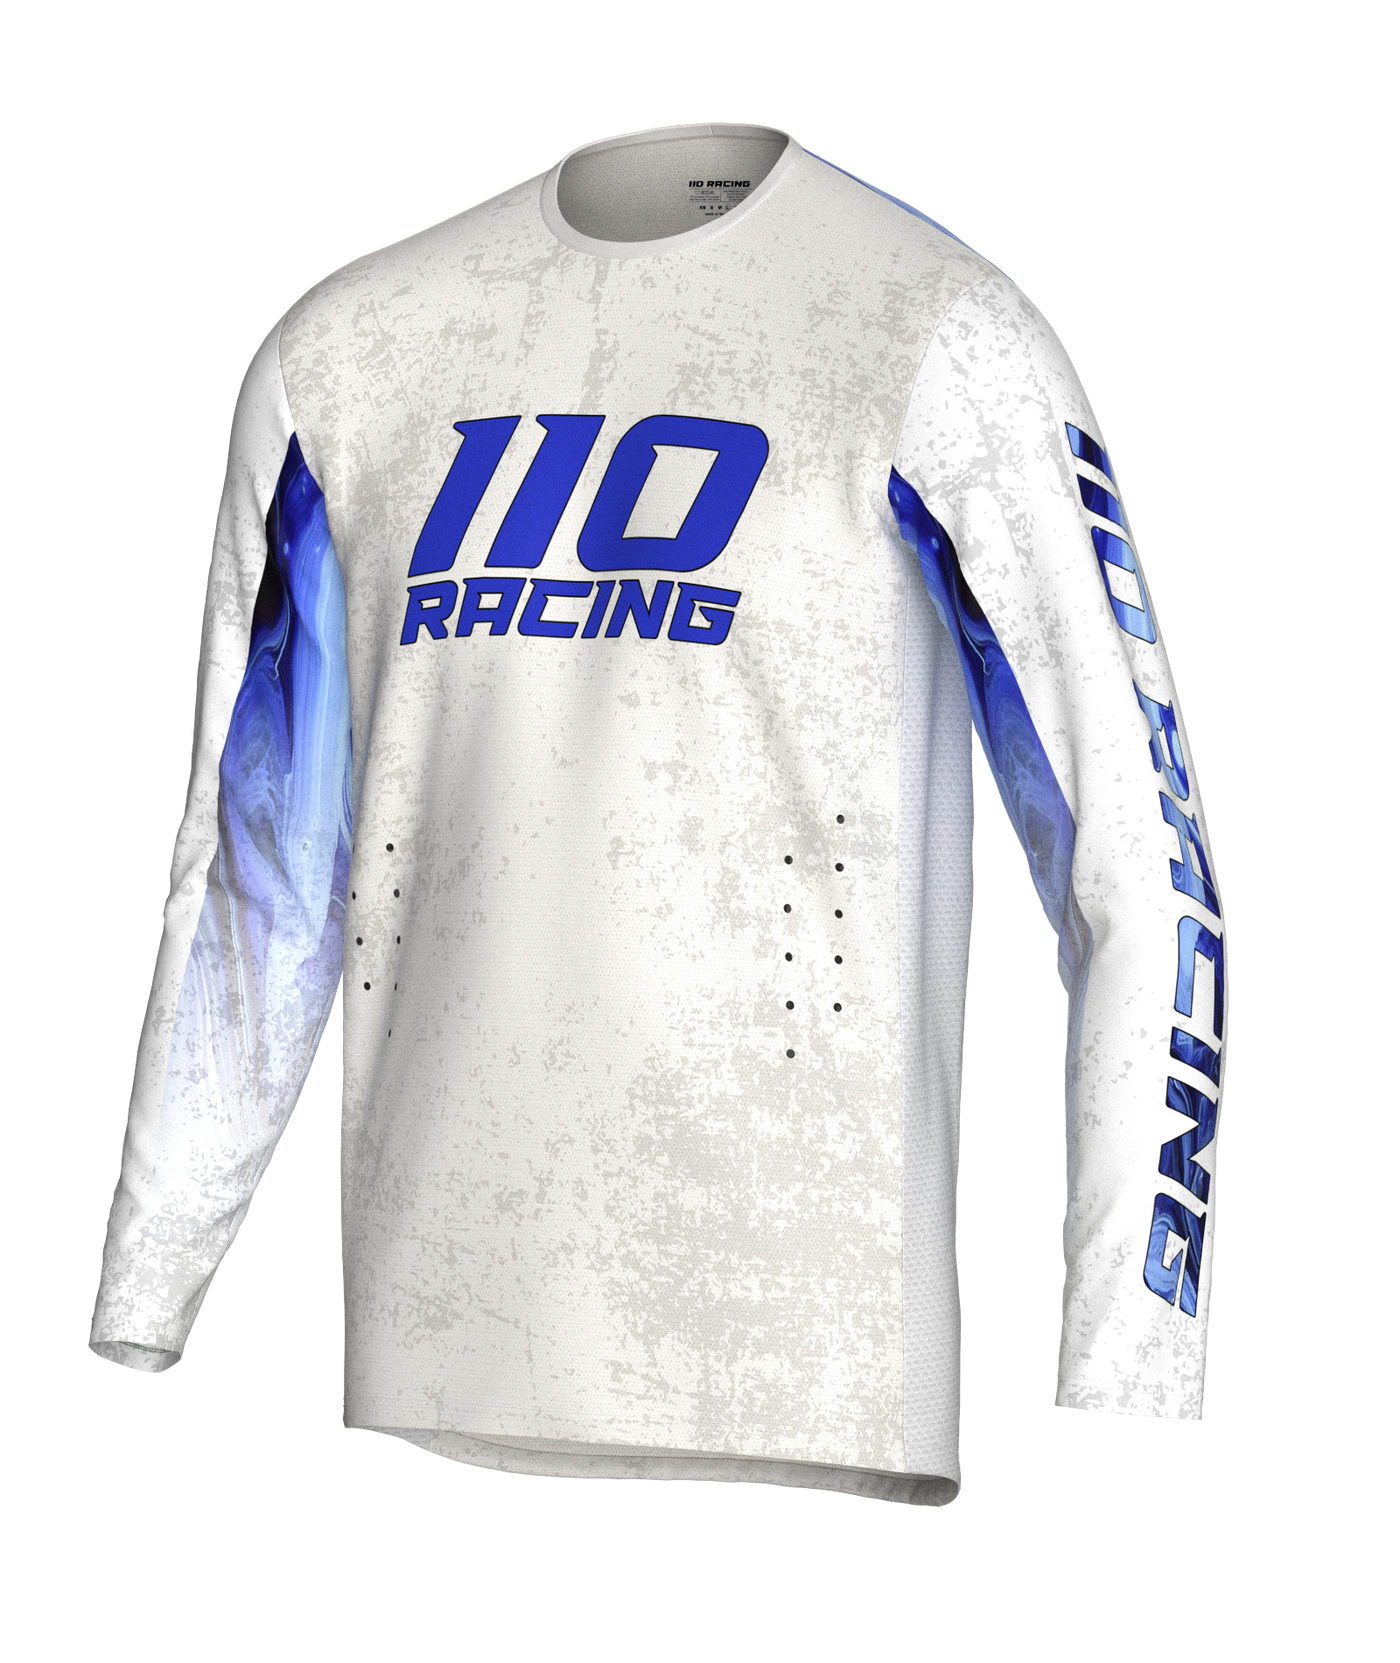 110 RACING // SE23 GRAPHITE WHITE/BLUE YOUTH